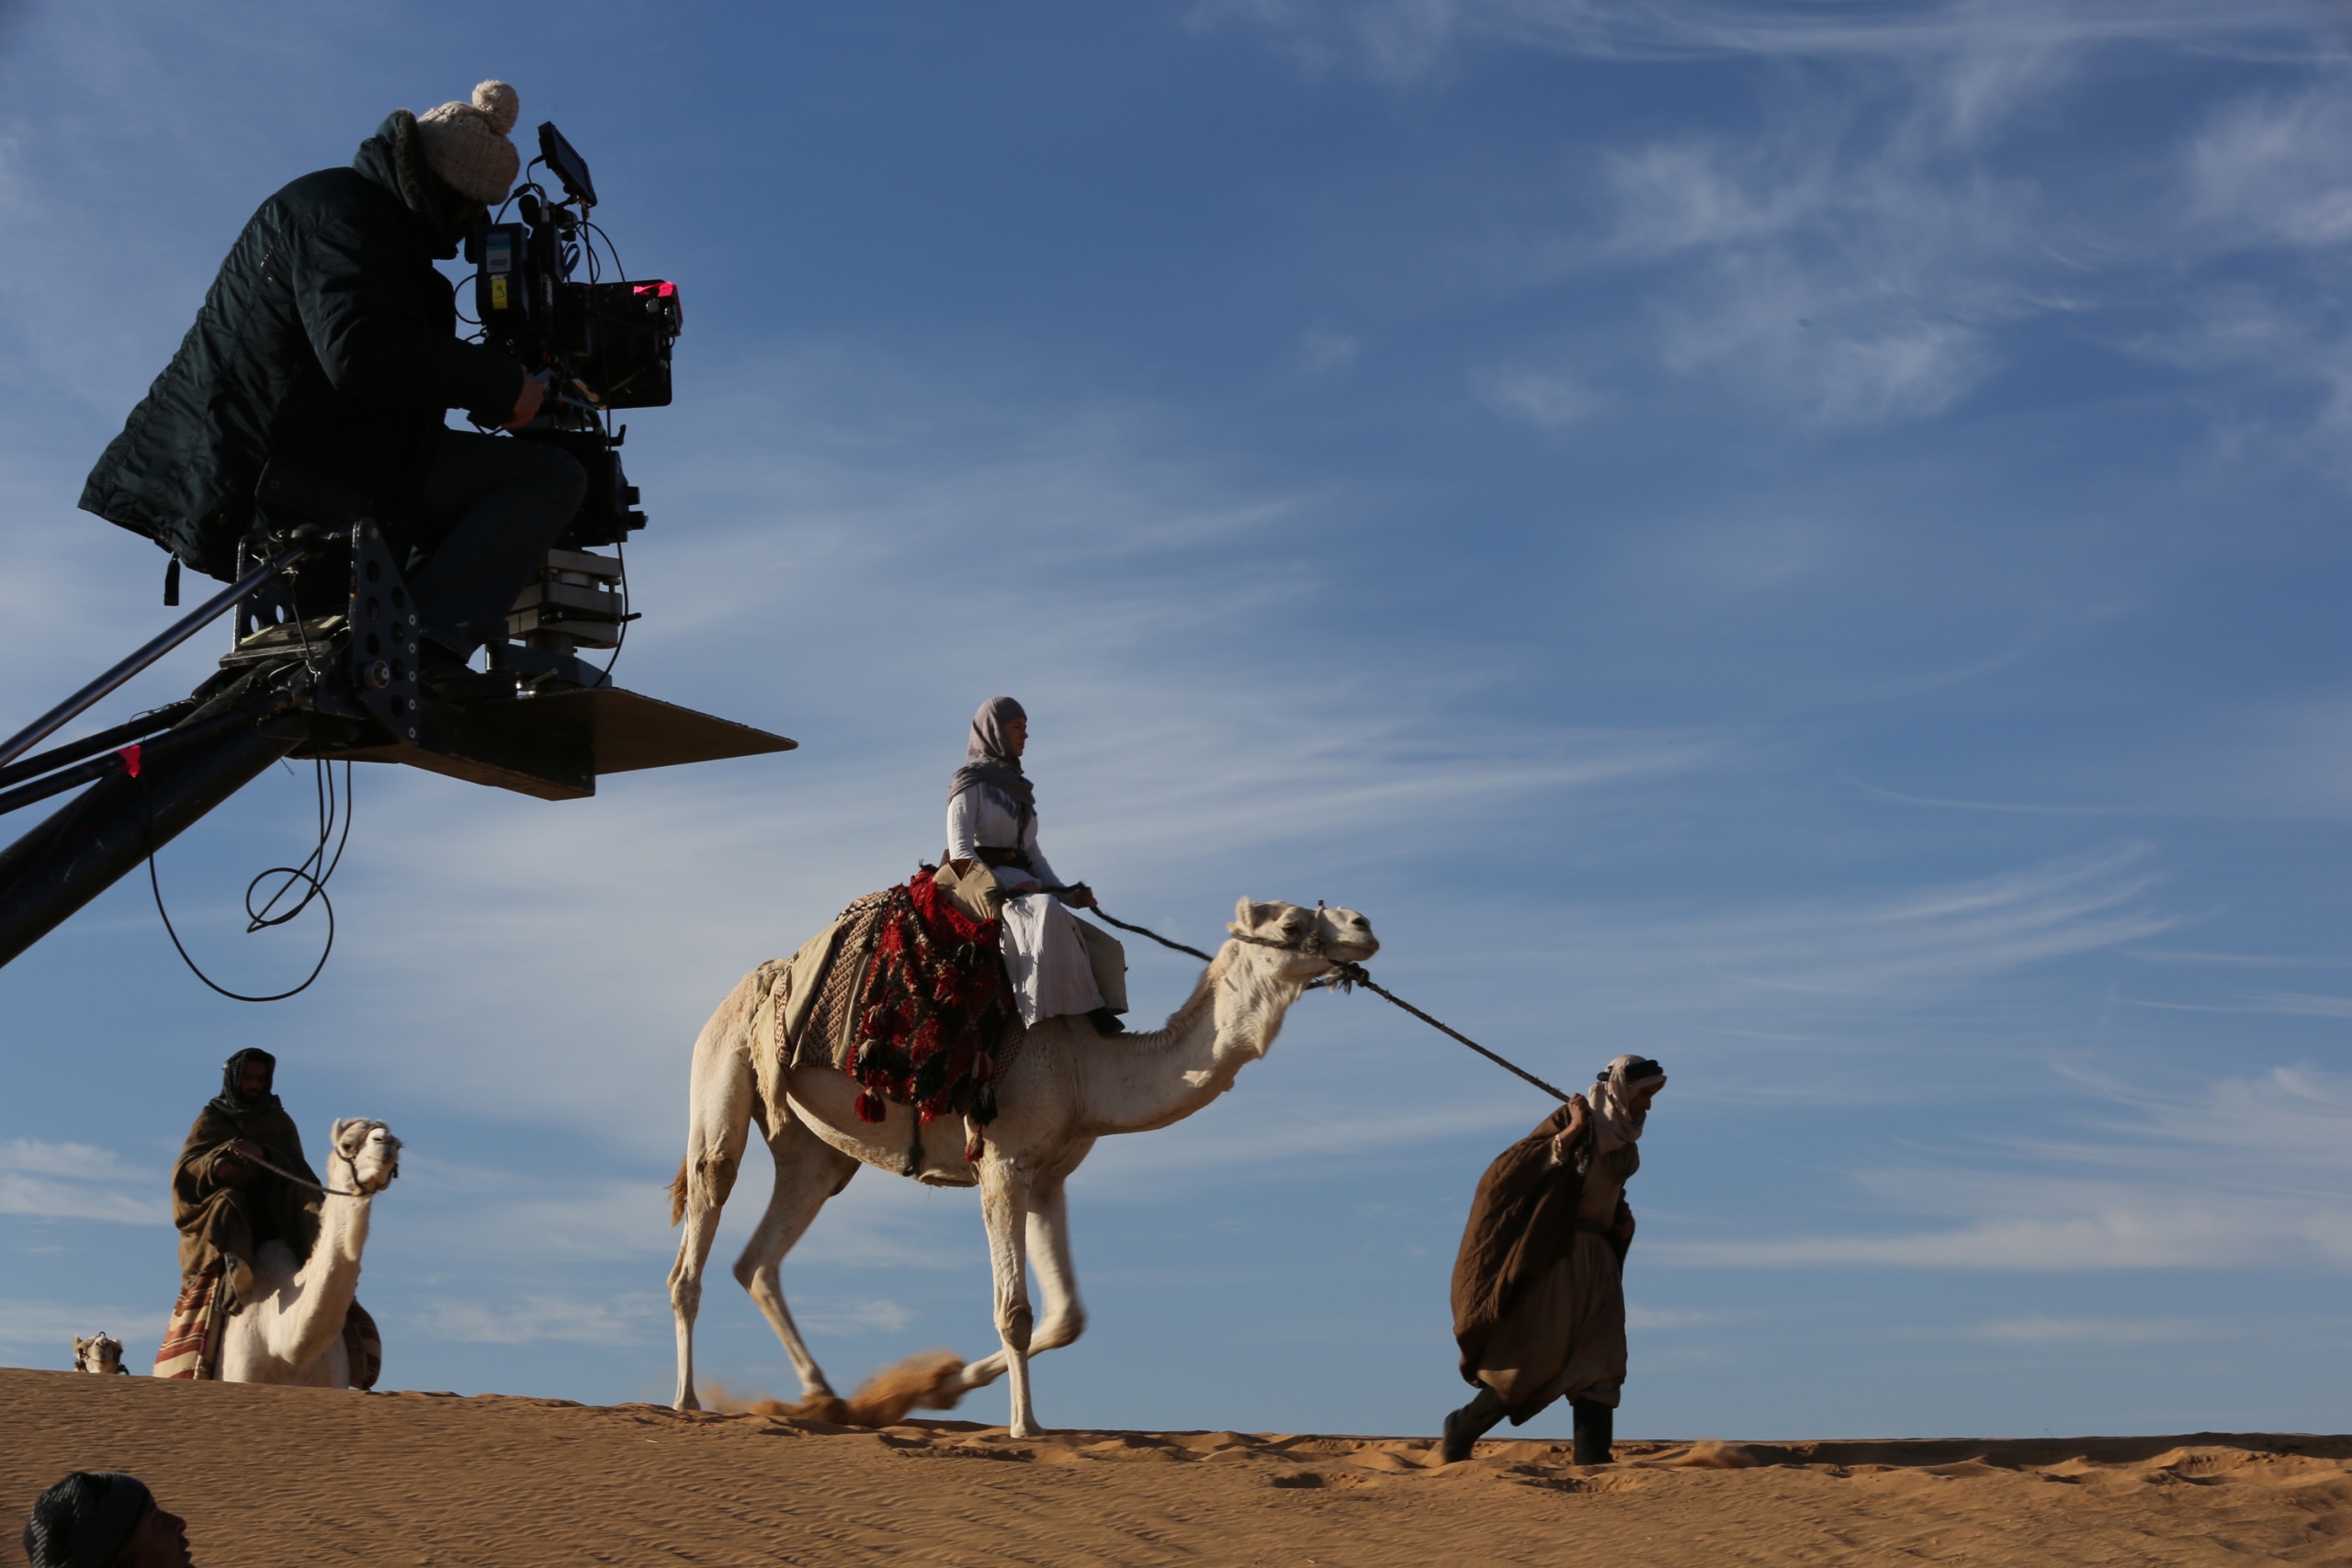 In front of a blue sky in the desert, a woman is led on a camel. Behind her, someone else is riding. On the left in the foreground a man sits on a camera crane and films the described scene.